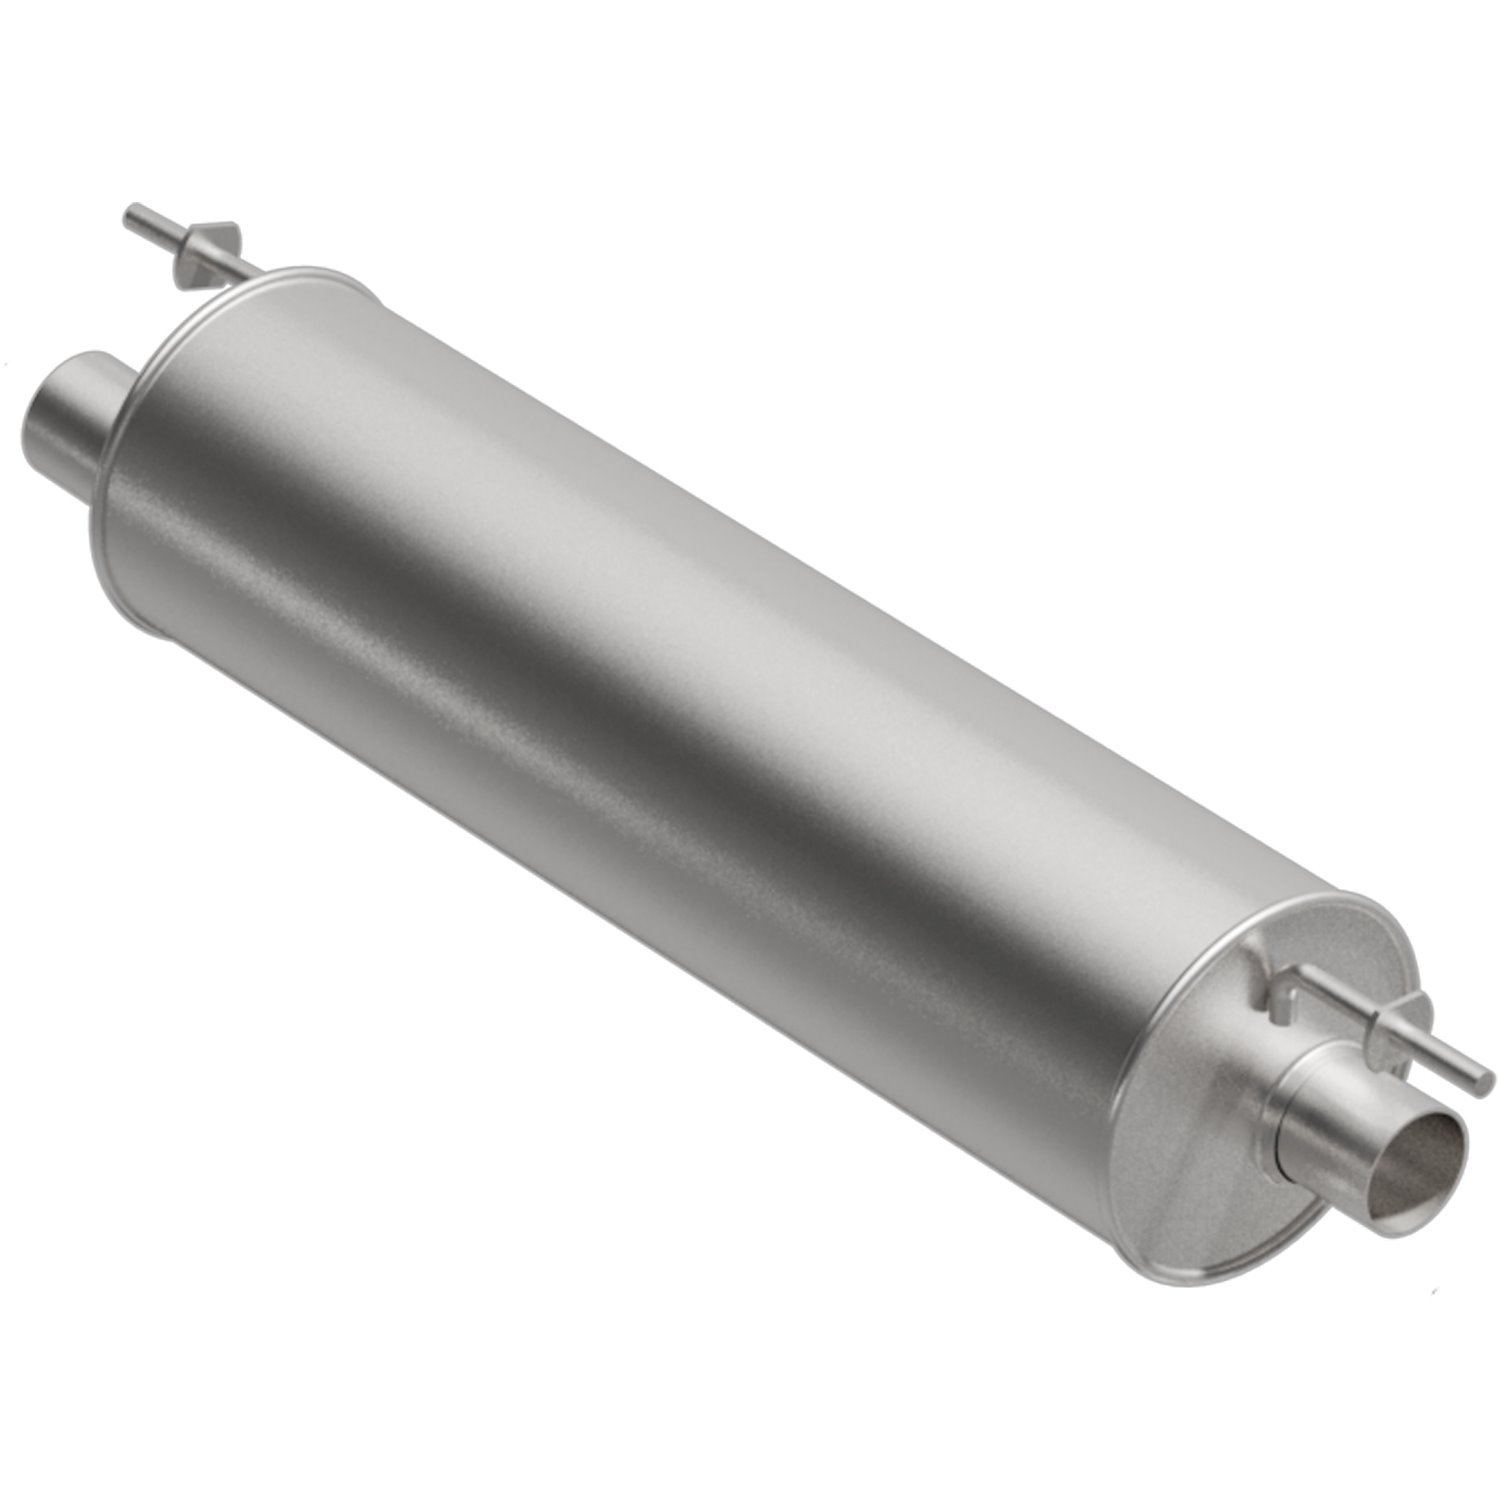 Direct-Fit Exhaust Muffler, 1974-1993 Volvo 140 and 240